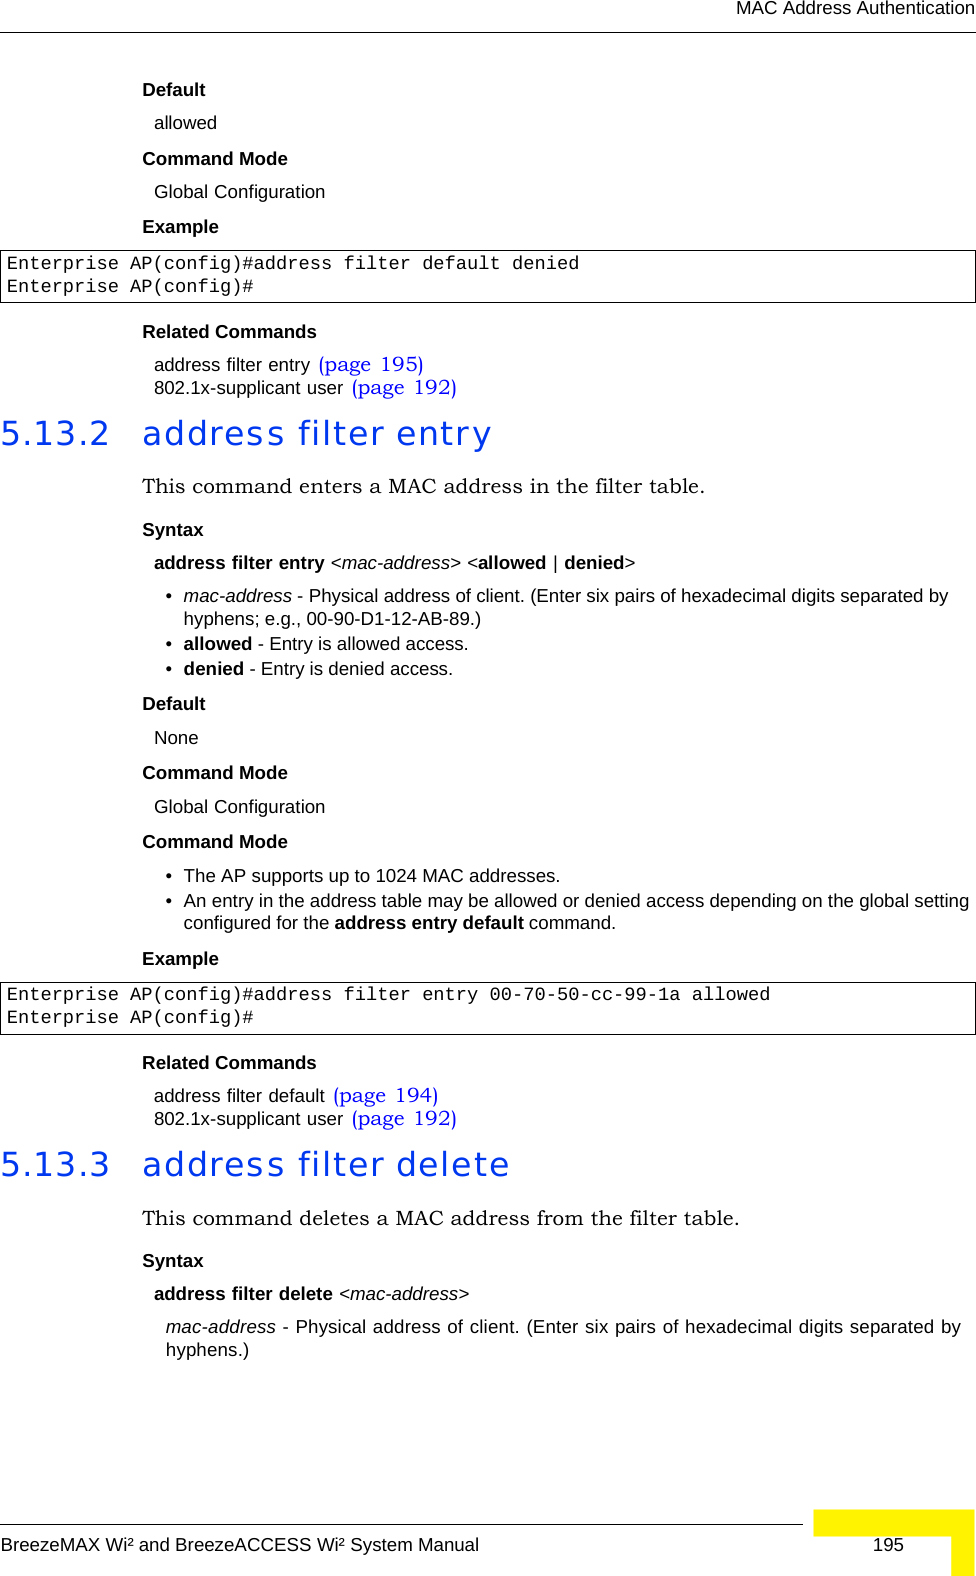 MAC Address AuthenticationBreezeMAX Wi² and BreezeACCESS Wi² System Manual  195DefaultallowedCommand ModeGlobal ConfigurationExampleRelated Commandsaddress filter entry (page 195)802.1x-supplicant user (page 192)5.13.2 address filter entryThis command enters a MAC address in the filter table.Syntaxaddress filter entry &lt;mac-address&gt; &lt;allowed | denied&gt;•mac-address - Physical address of client. (Enter six pairs of hexadecimal digits separated by hyphens; e.g., 00-90-D1-12-AB-89.)•allowed - Entry is allowed access.•denied - Entry is denied access.DefaultNoneCommand ModeGlobal ConfigurationCommand Mode• The AP supports up to 1024 MAC addresses.• An entry in the address table may be allowed or denied access depending on the global setting configured for the address entry default command.ExampleRelated Commandsaddress filter default (page 194)802.1x-supplicant user (page 192)5.13.3 address filter deleteThis command deletes a MAC address from the filter table.Syntaxaddress filter delete &lt;mac-address&gt;mac-address - Physical address of client. (Enter six pairs of hexadecimal digits separated by hyphens.)Enterprise AP(config)#address filter default deniedEnterprise AP(config)#Enterprise AP(config)#address filter entry 00-70-50-cc-99-1a allowedEnterprise AP(config)#